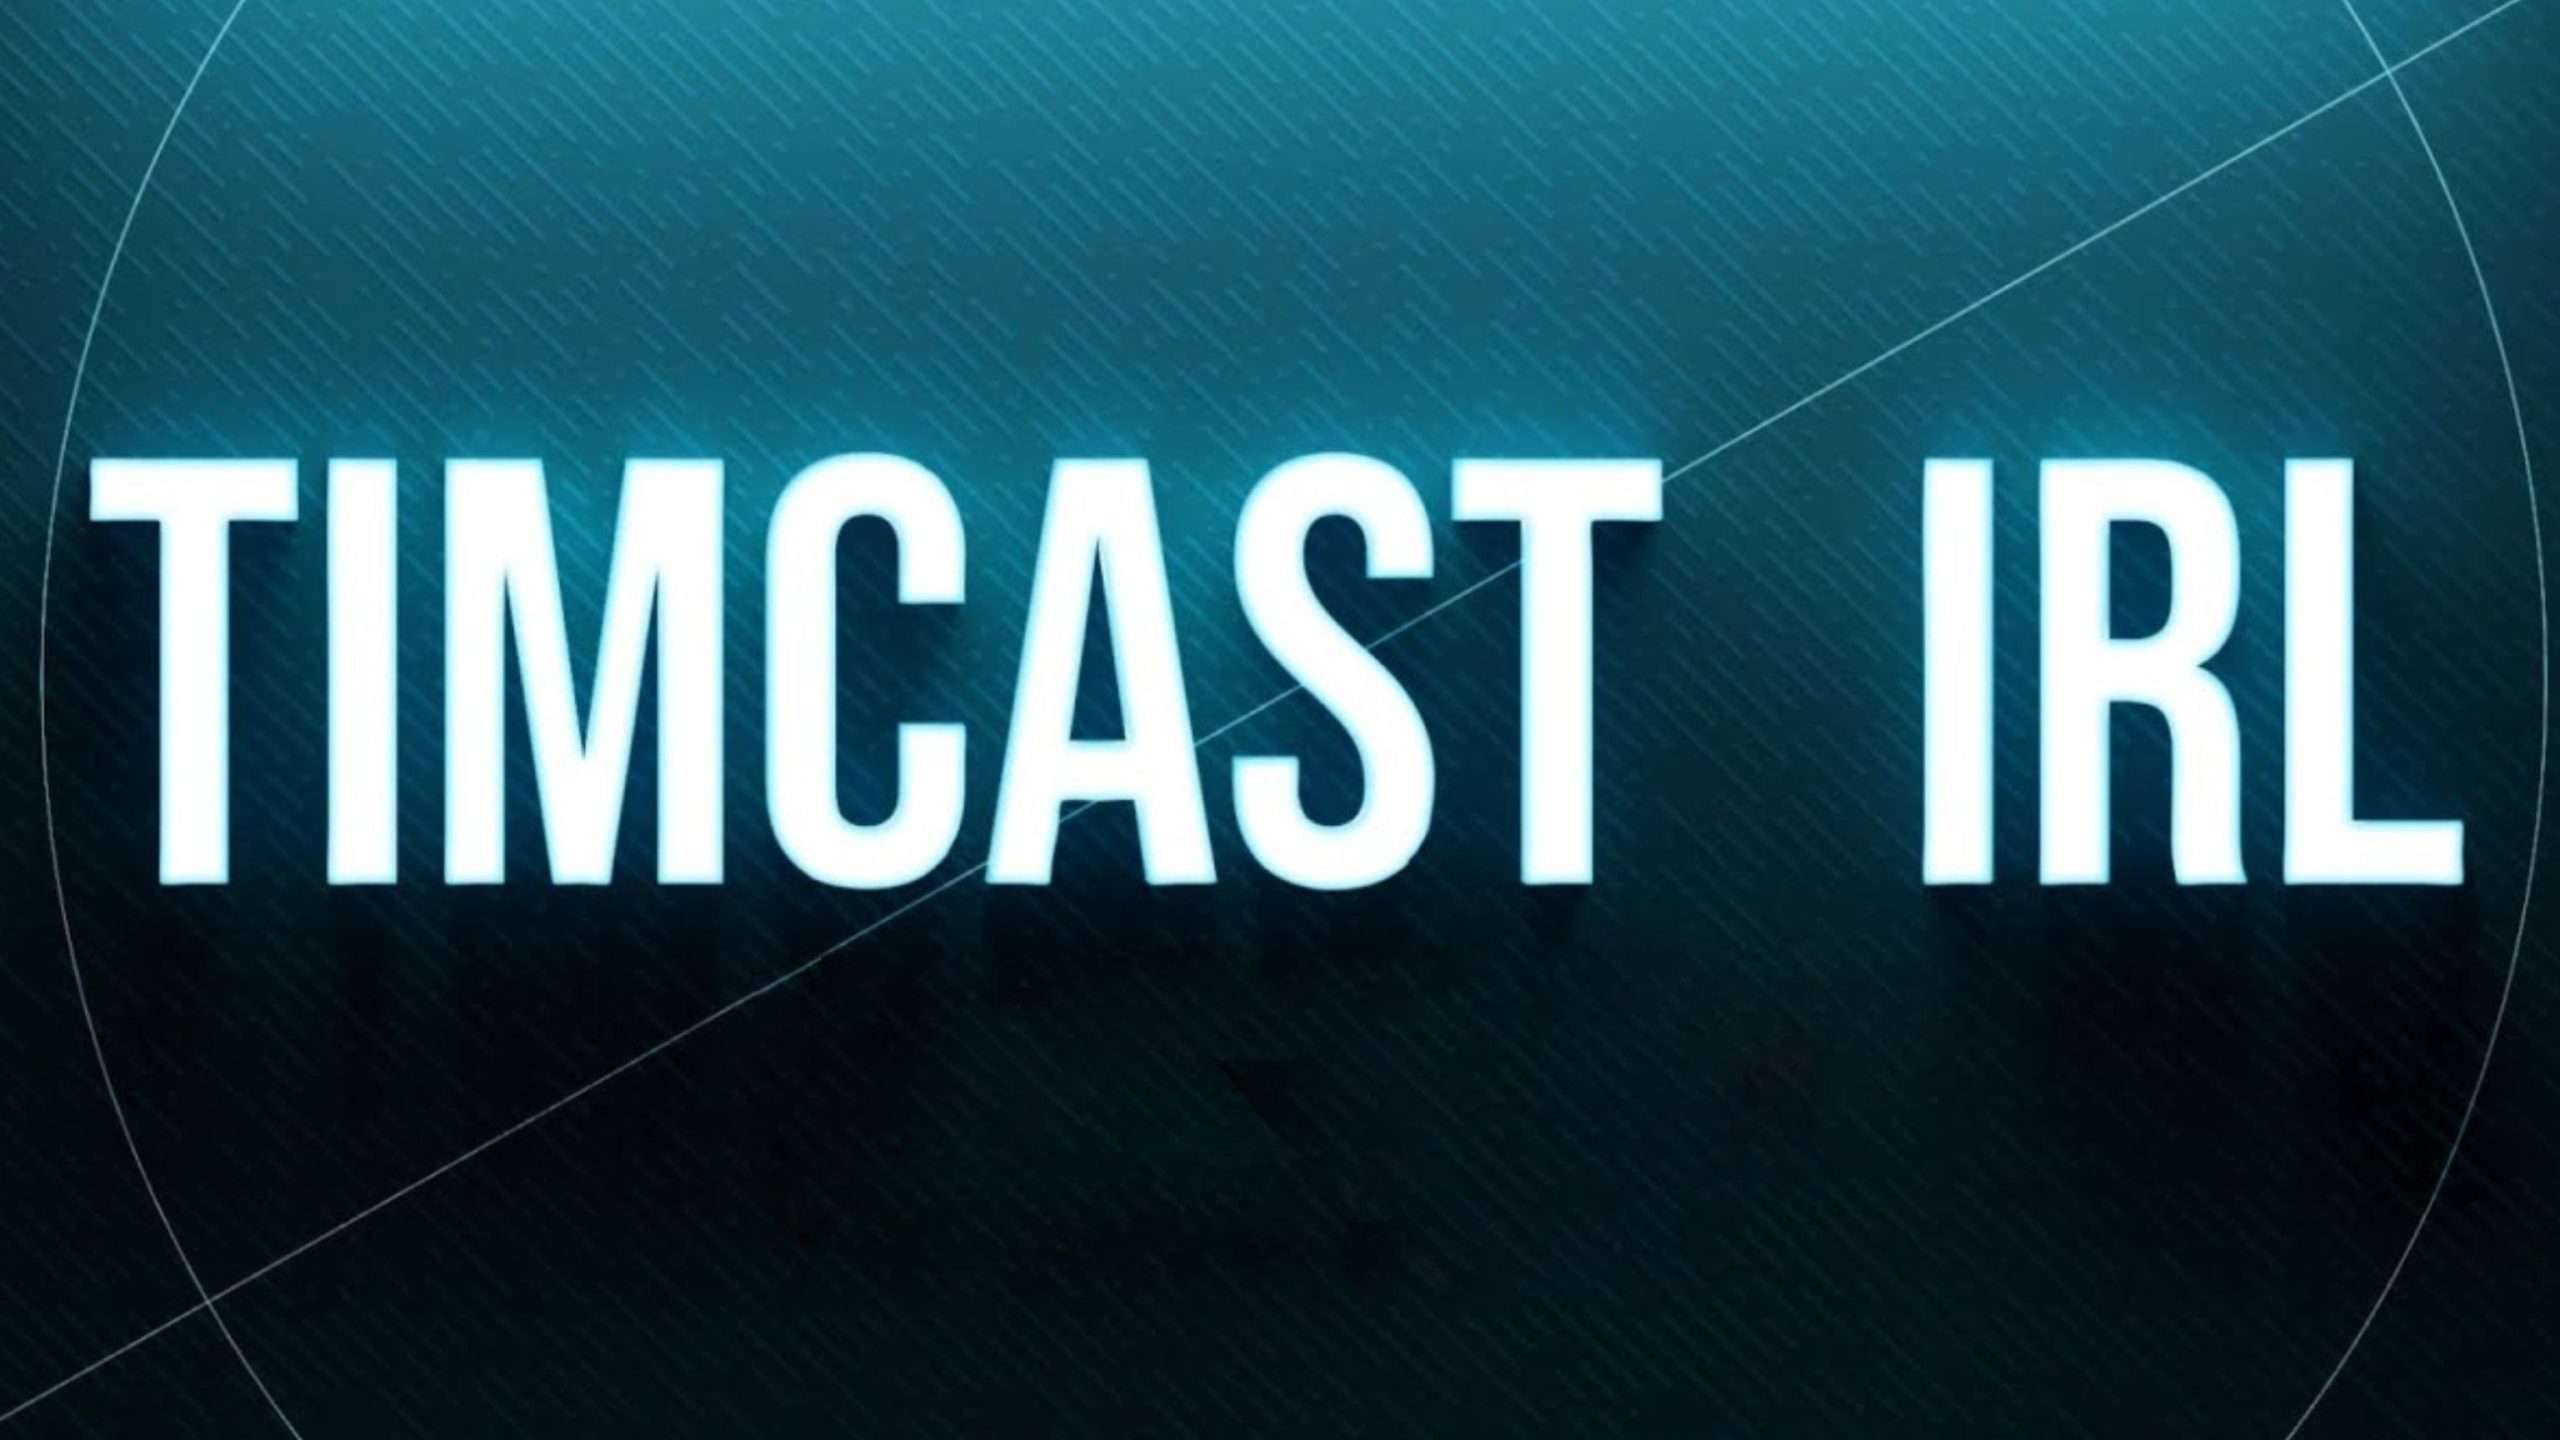 Top Timcast Episodes Are Deleted in YouTube’s Retroactive Censorship Raid